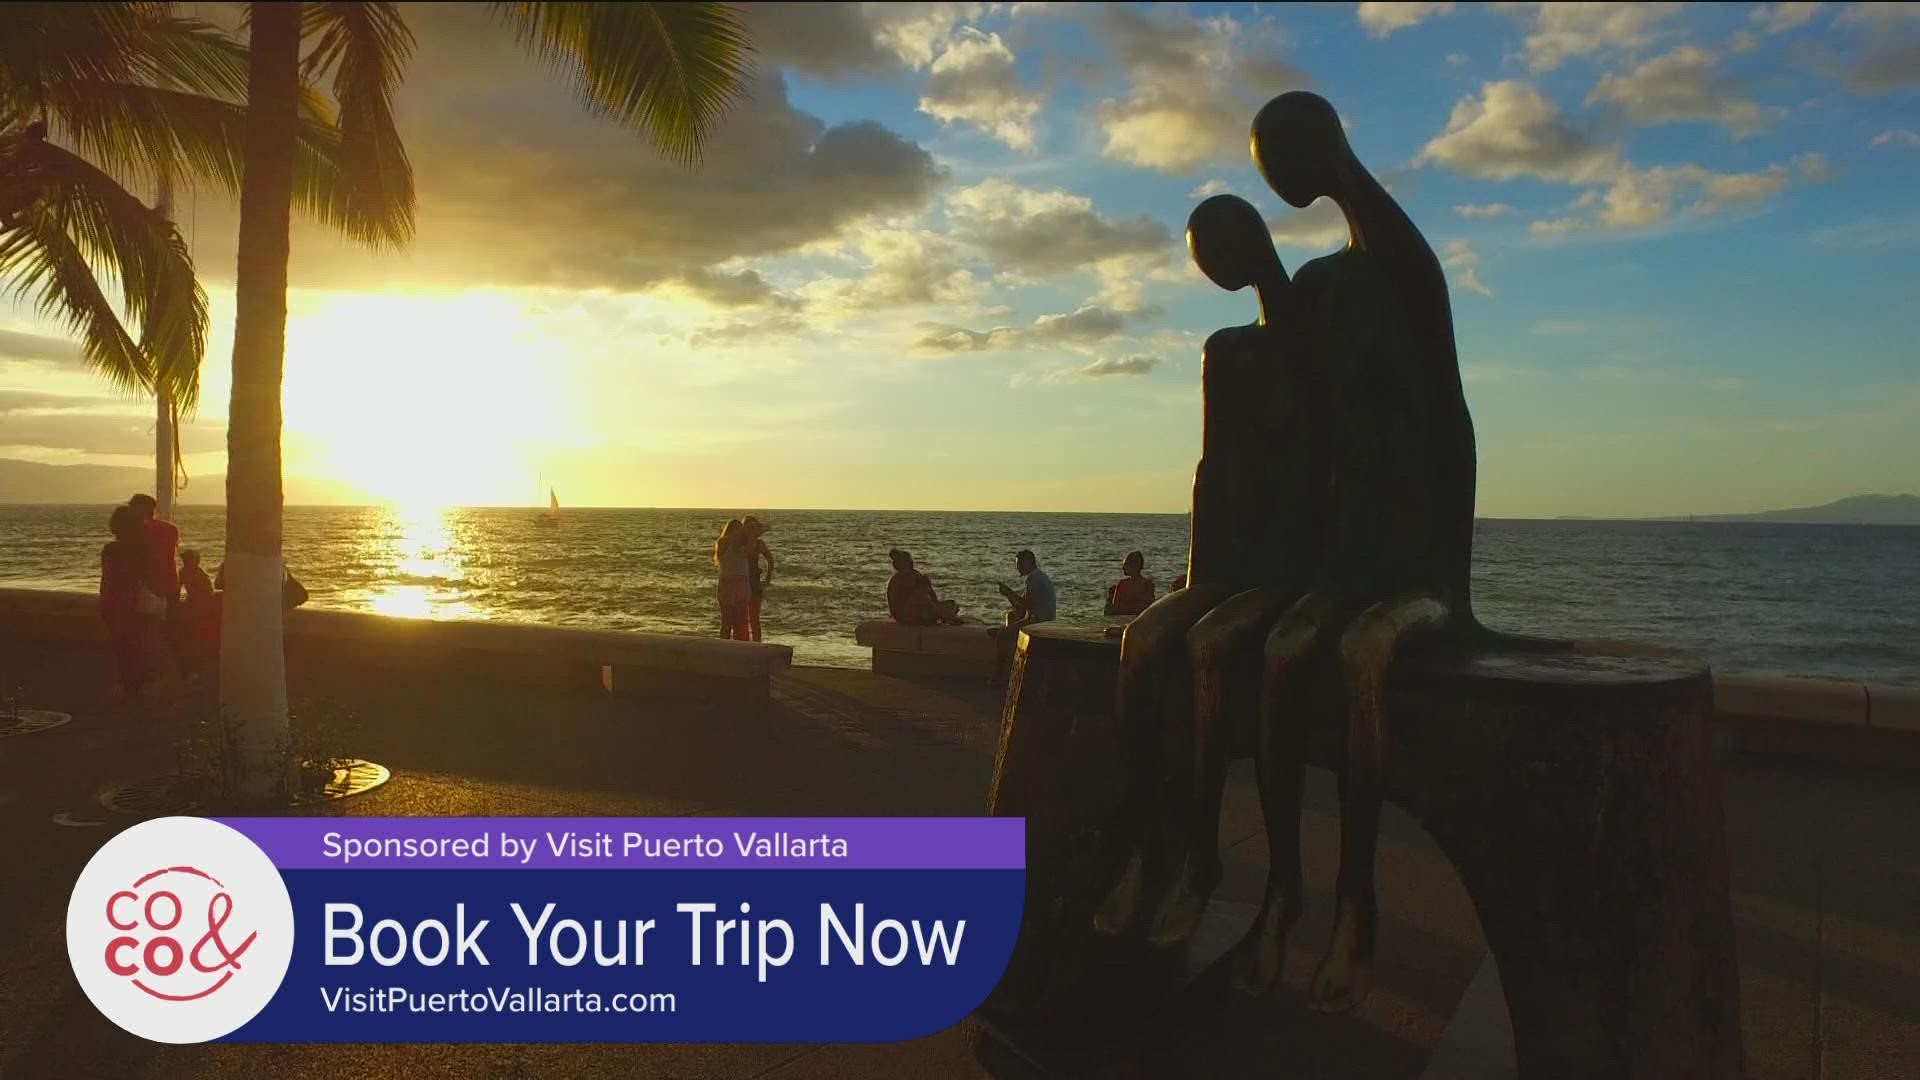 Go to VisitPuertoVallarta.com to start planning your next getaway! **PAID CONTENT**